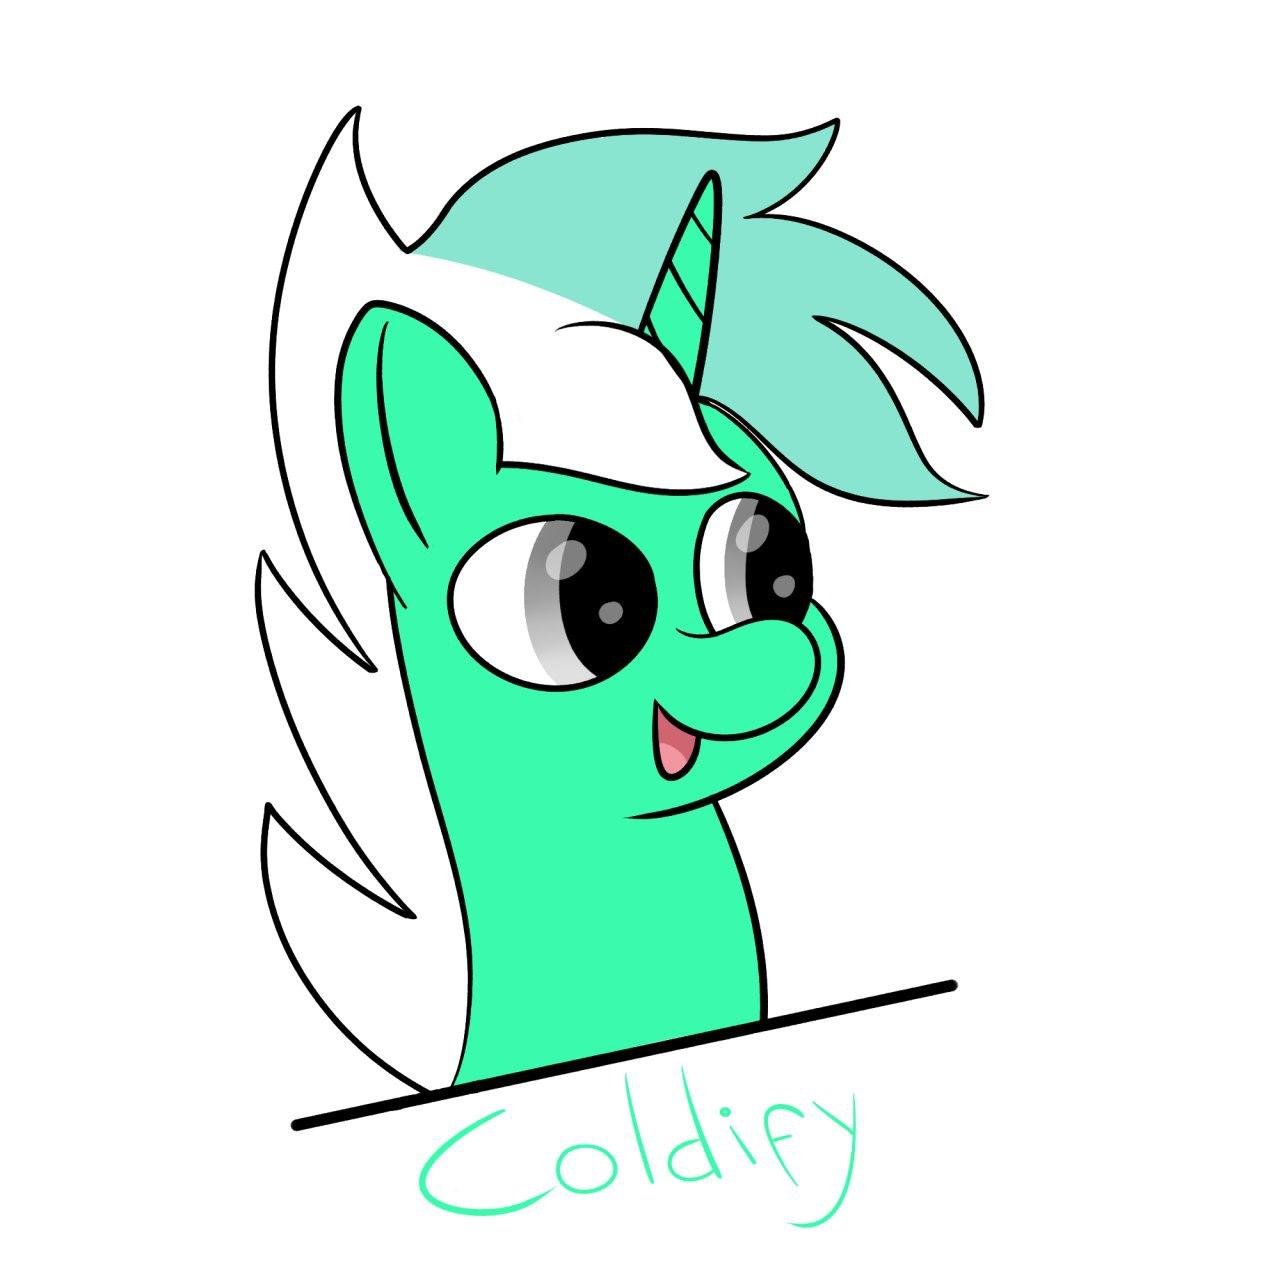 Coldify - Discord server manager